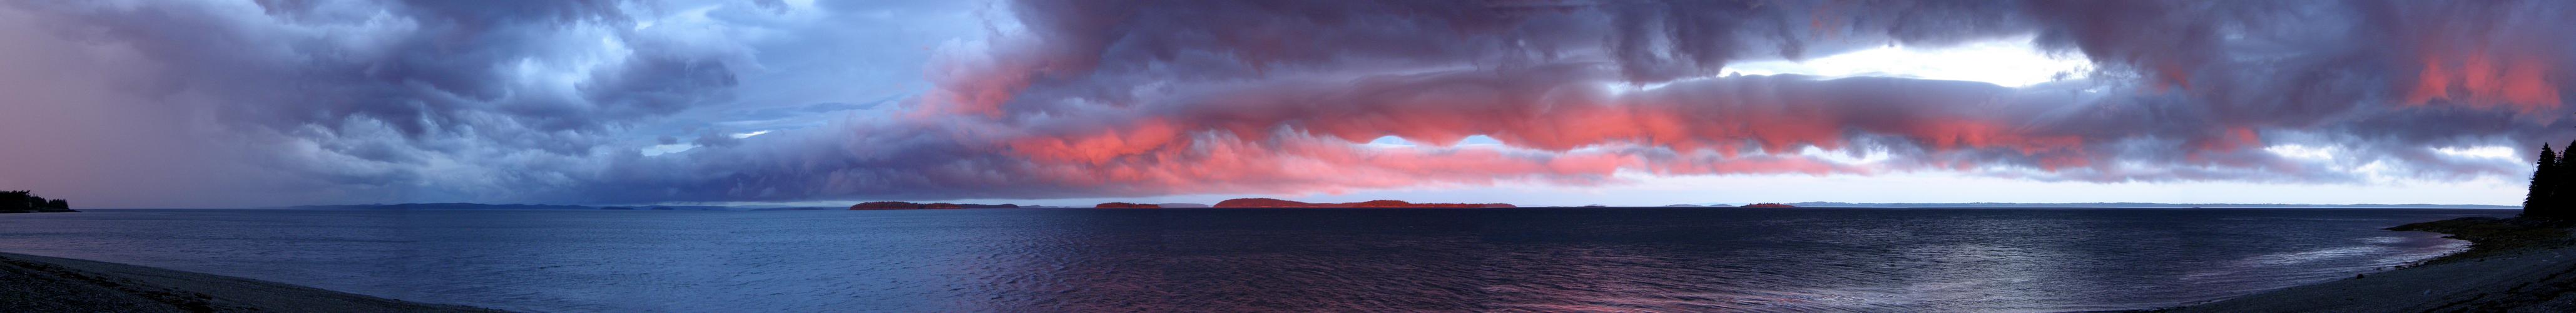 sunset panorama across East Penobscot Bay as seen from Islesboro Island in Maine